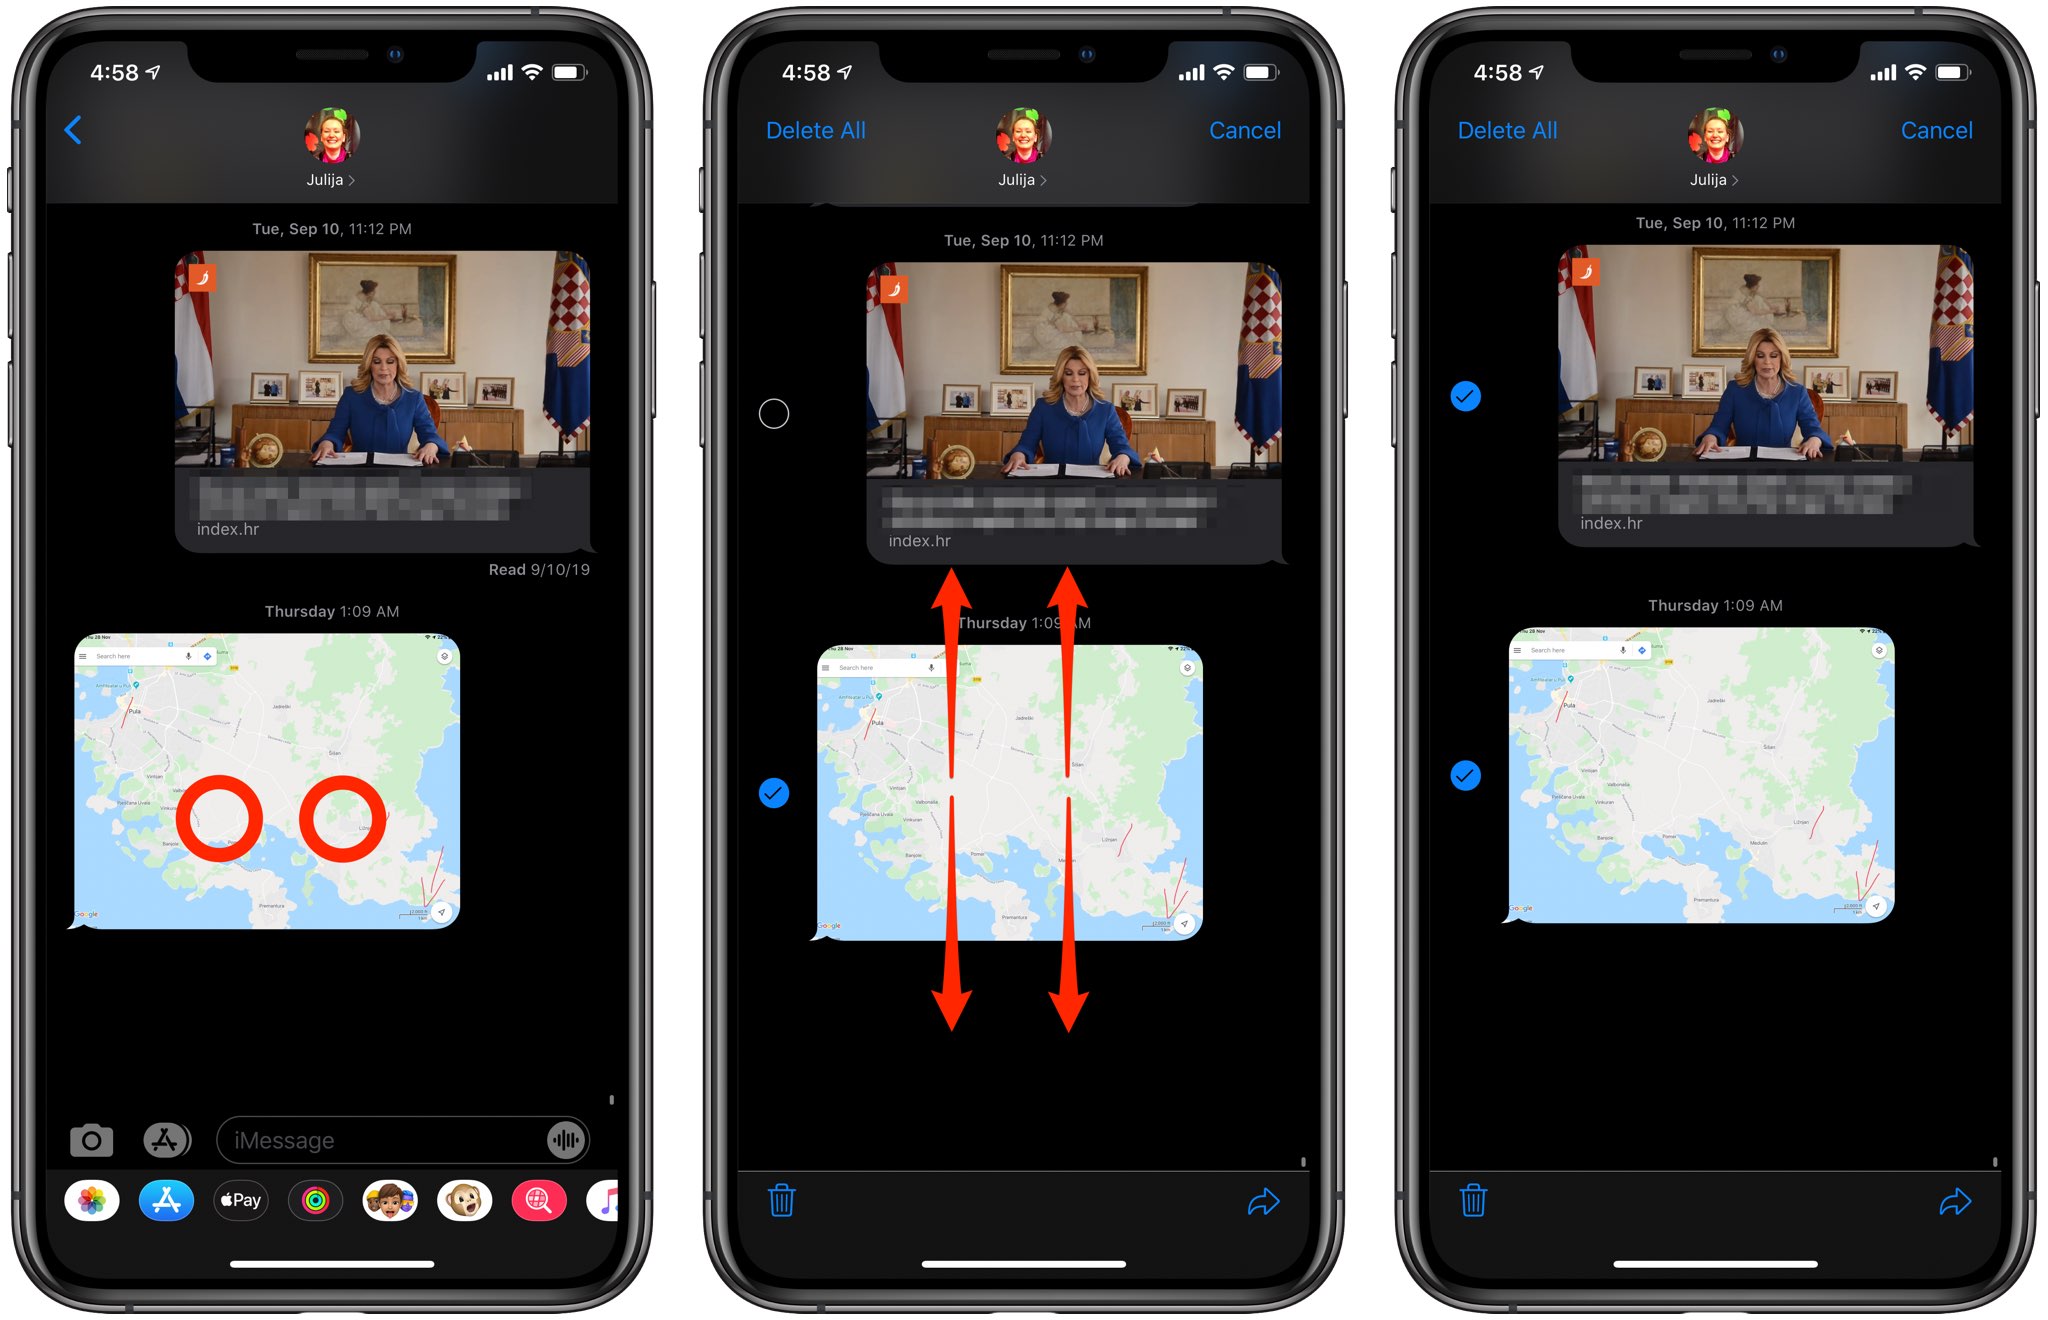 select chats with two-finger tap on iPhone